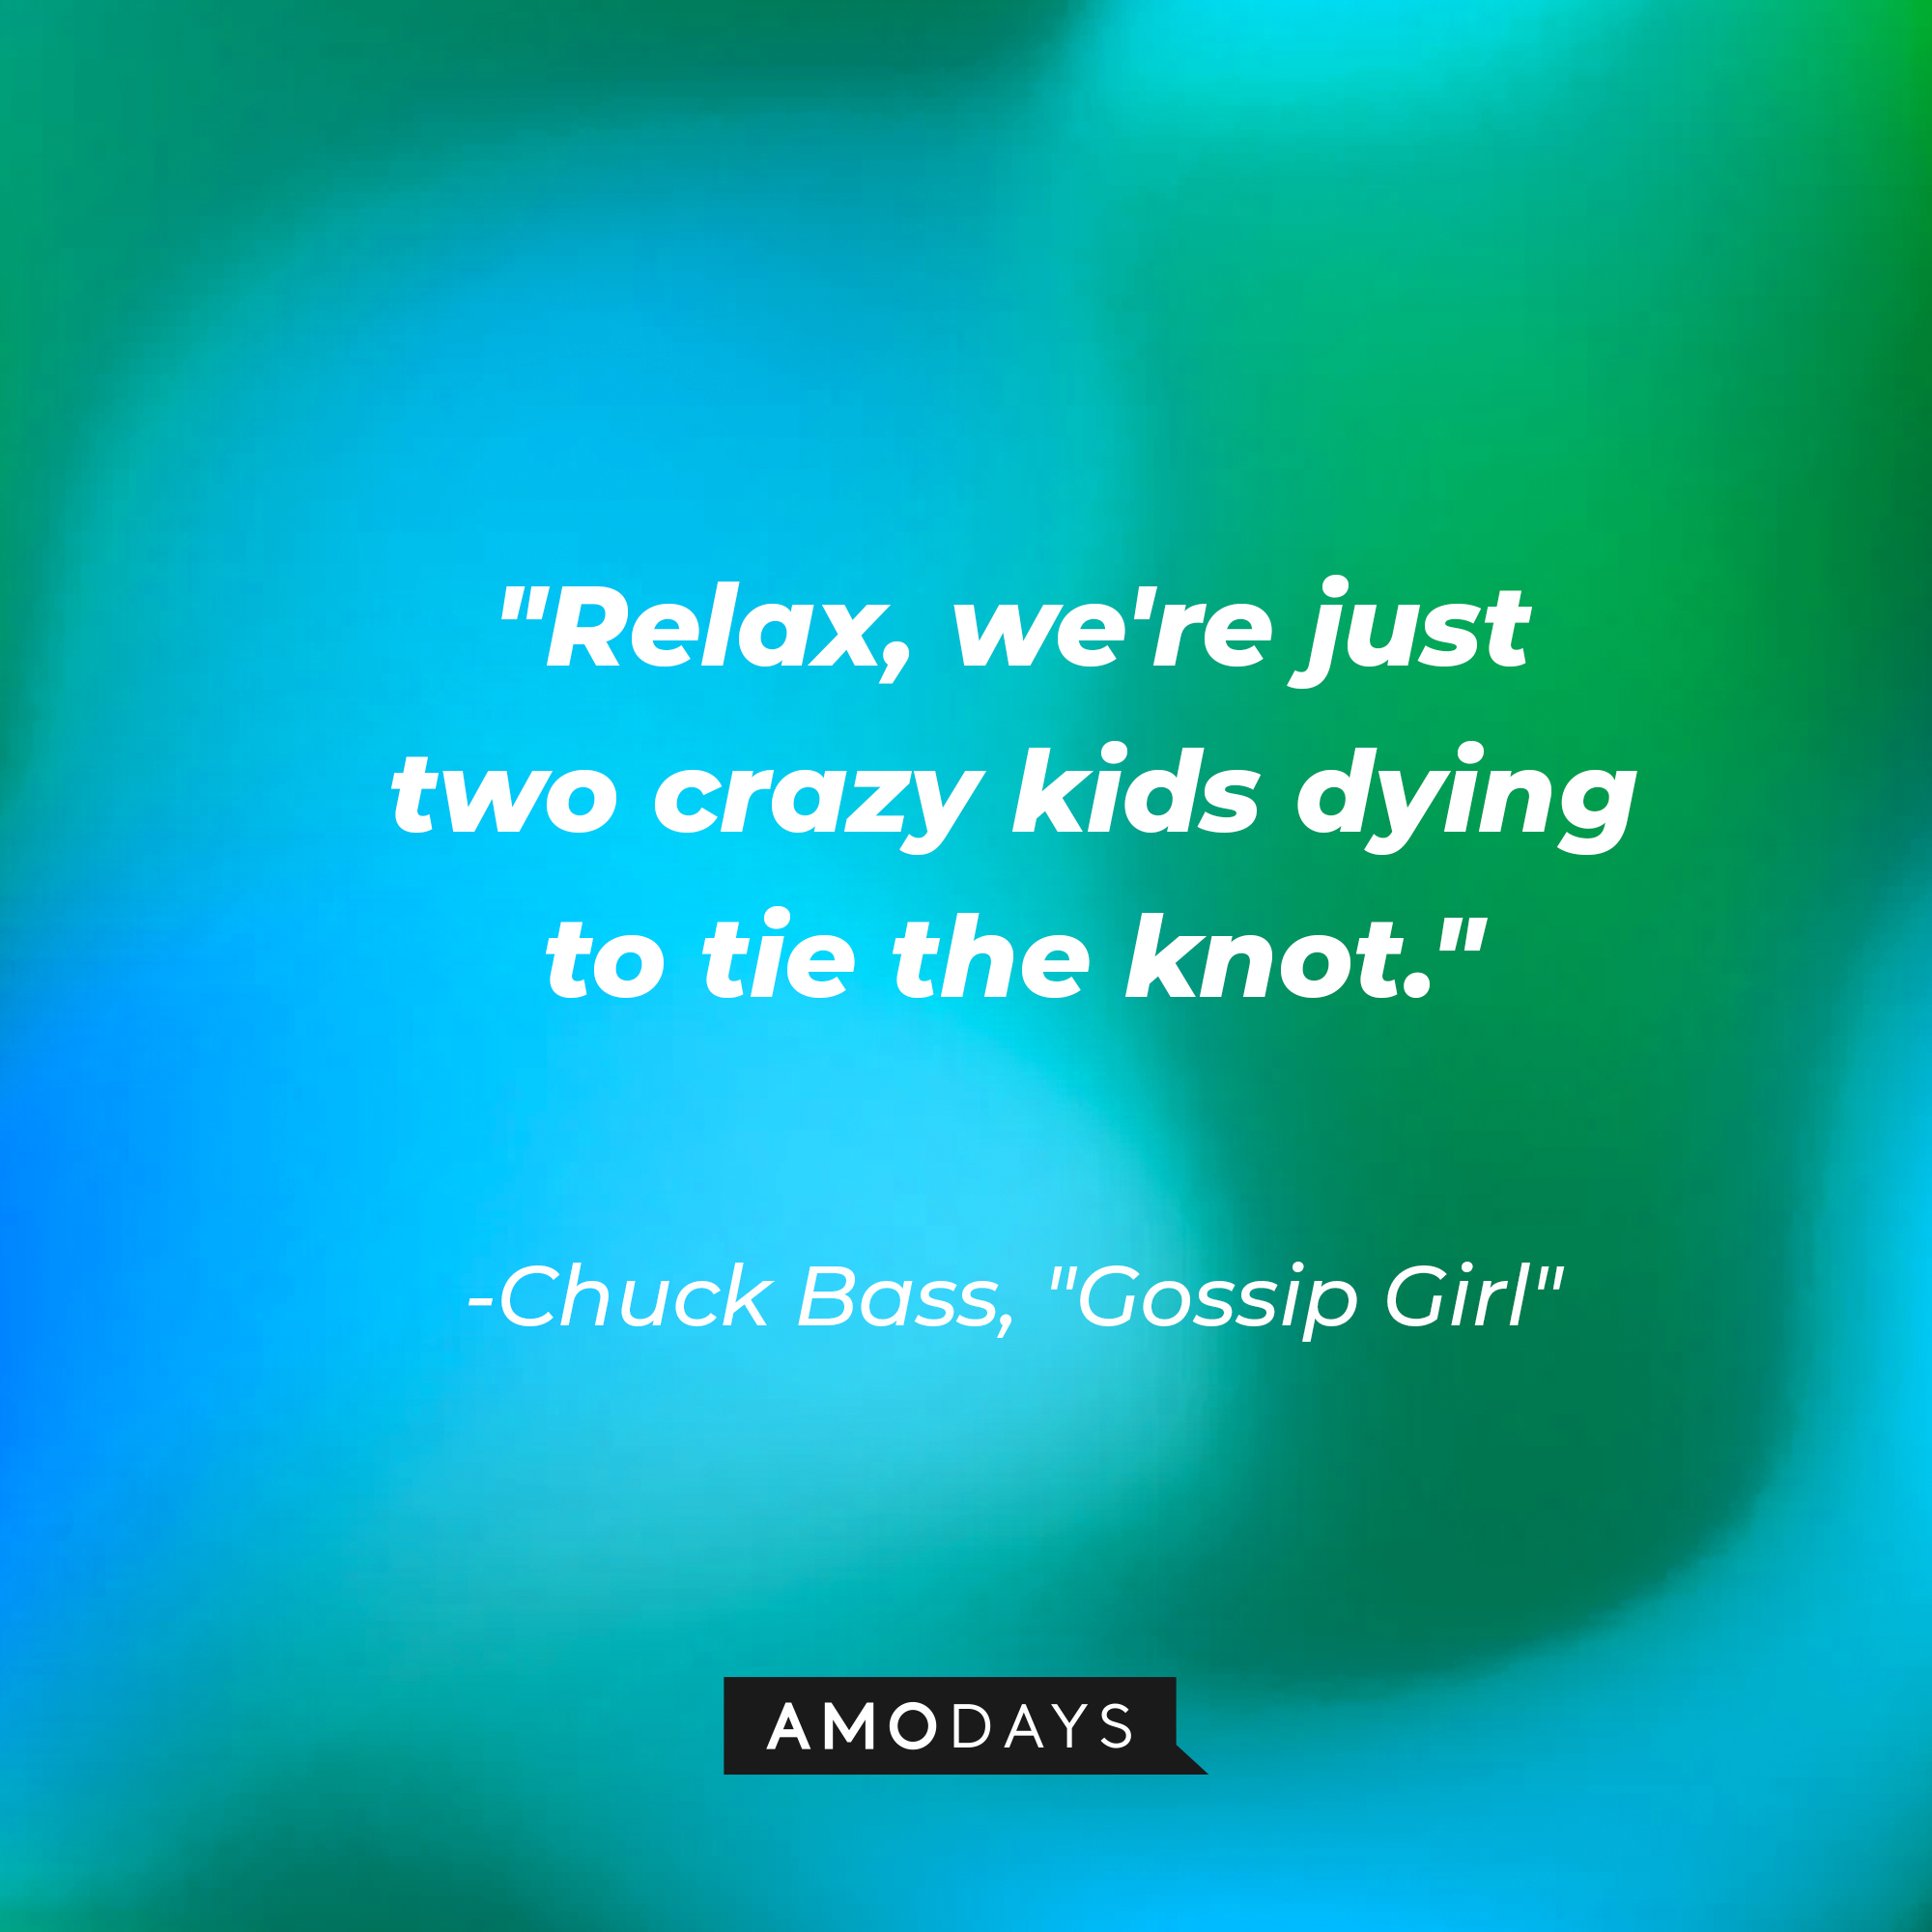 Chuck Bass' quote: "Relax, we're just two crazy kids dying to tie the knot." | Source: AmoDays